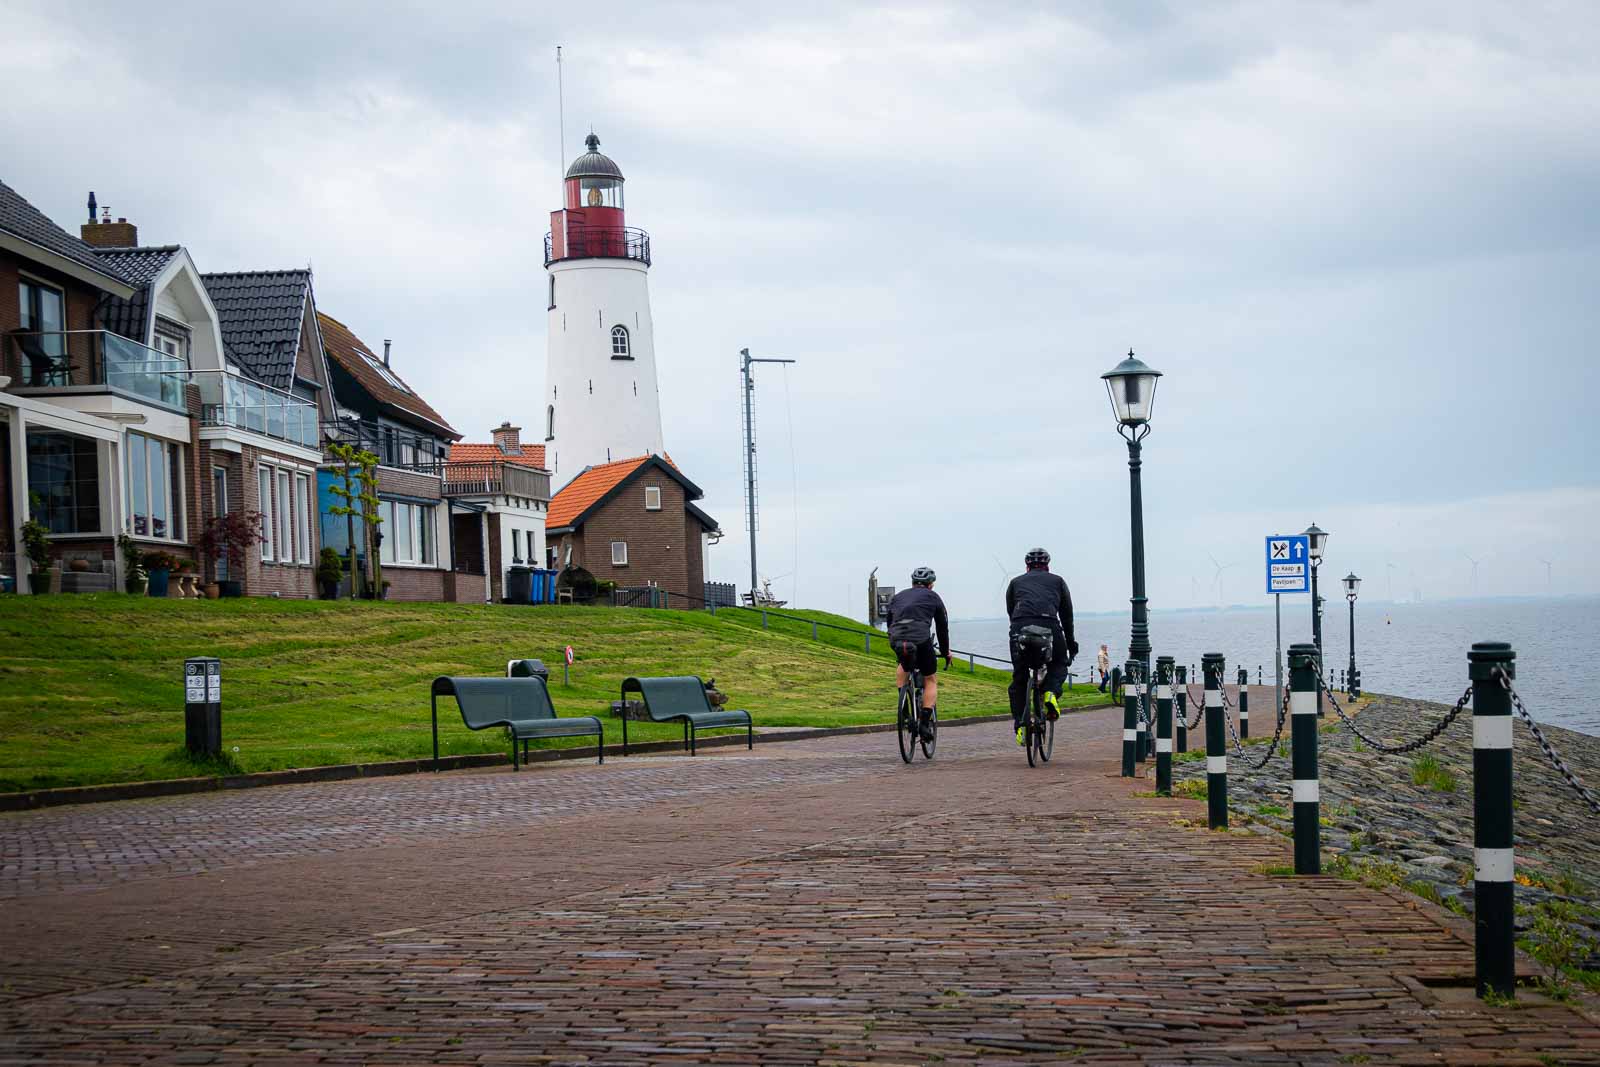 Two ultra-cycling cyclists from behind riding along a promenade where a lighthouse stands.